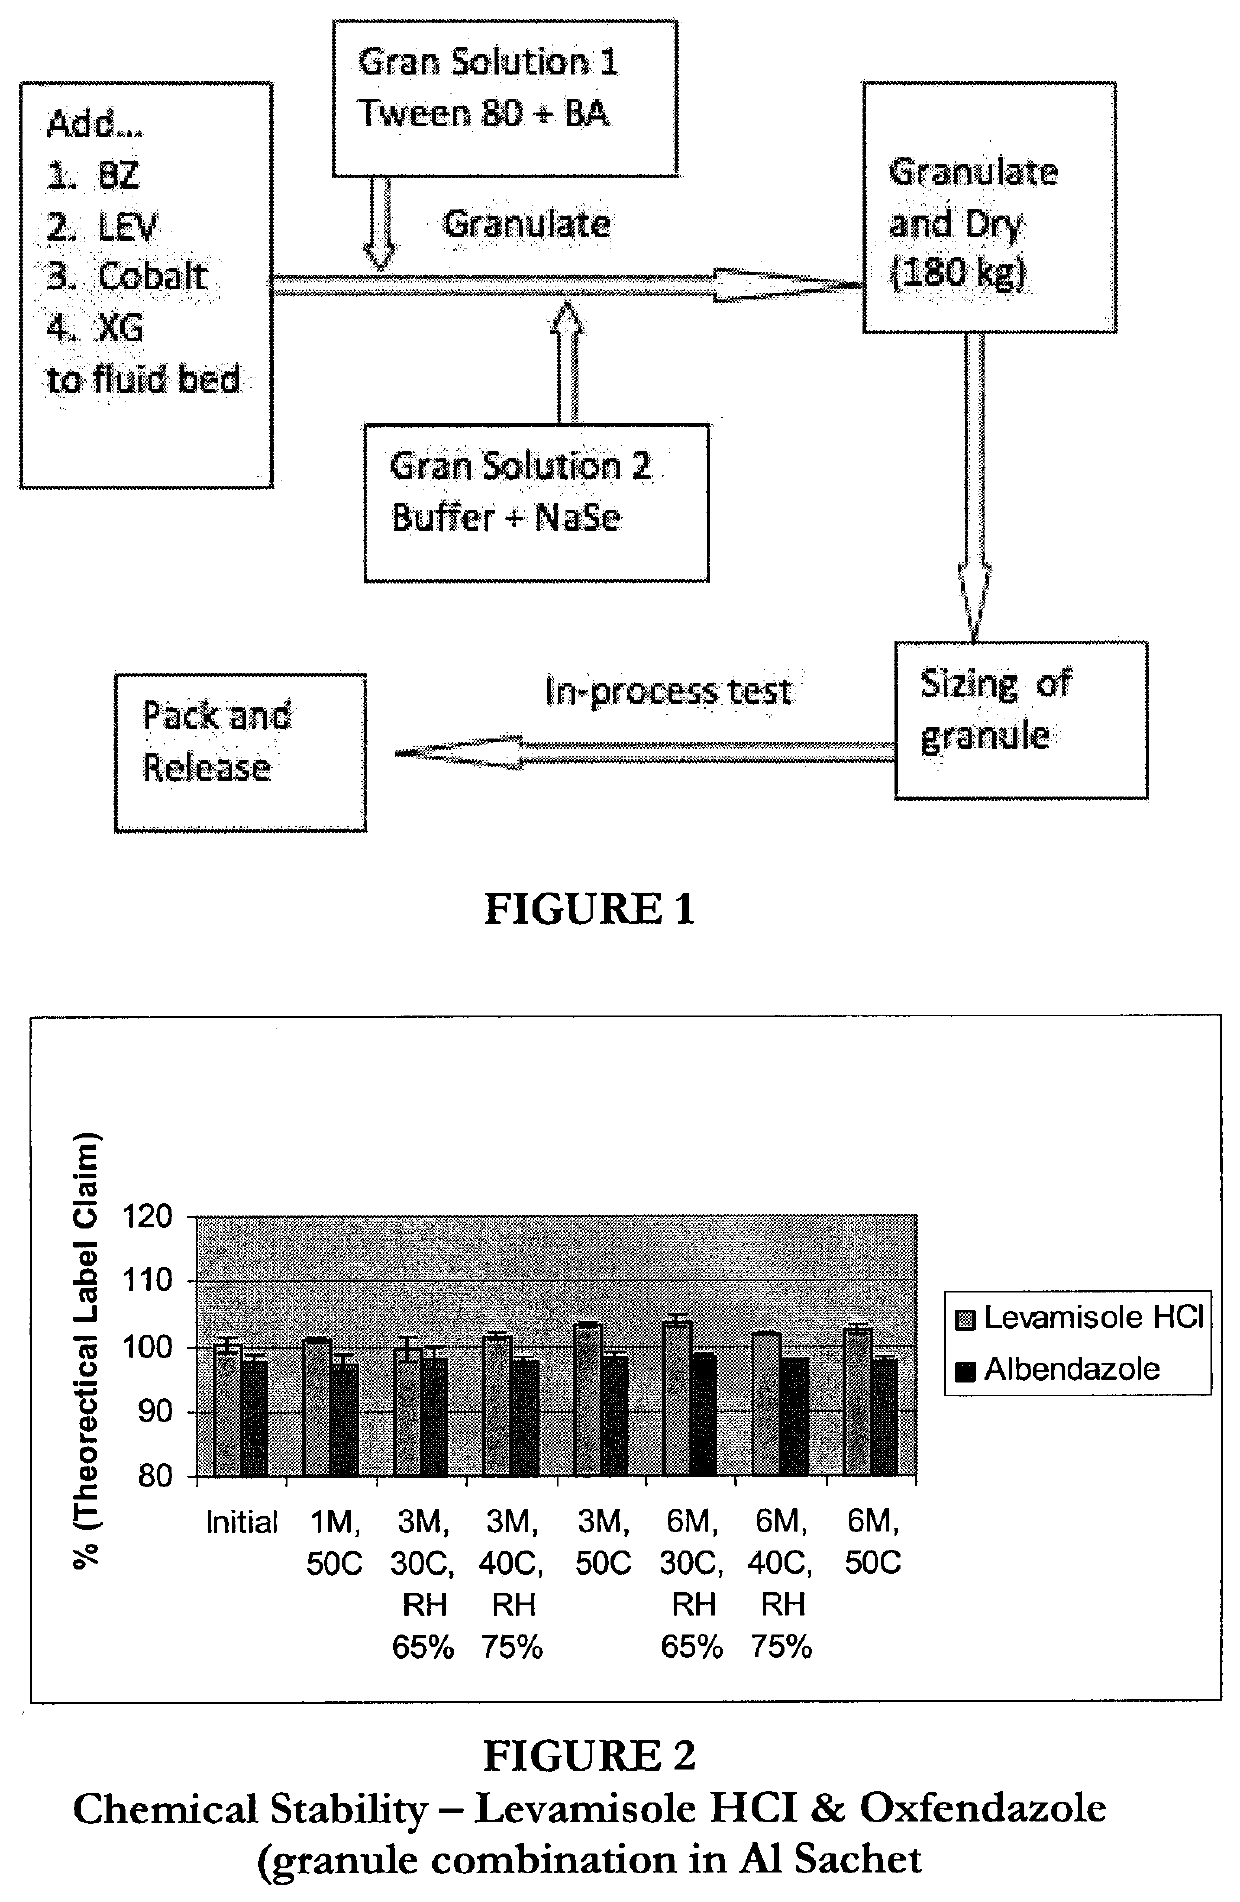 Granulated anthelmintic preparations and delivery systems